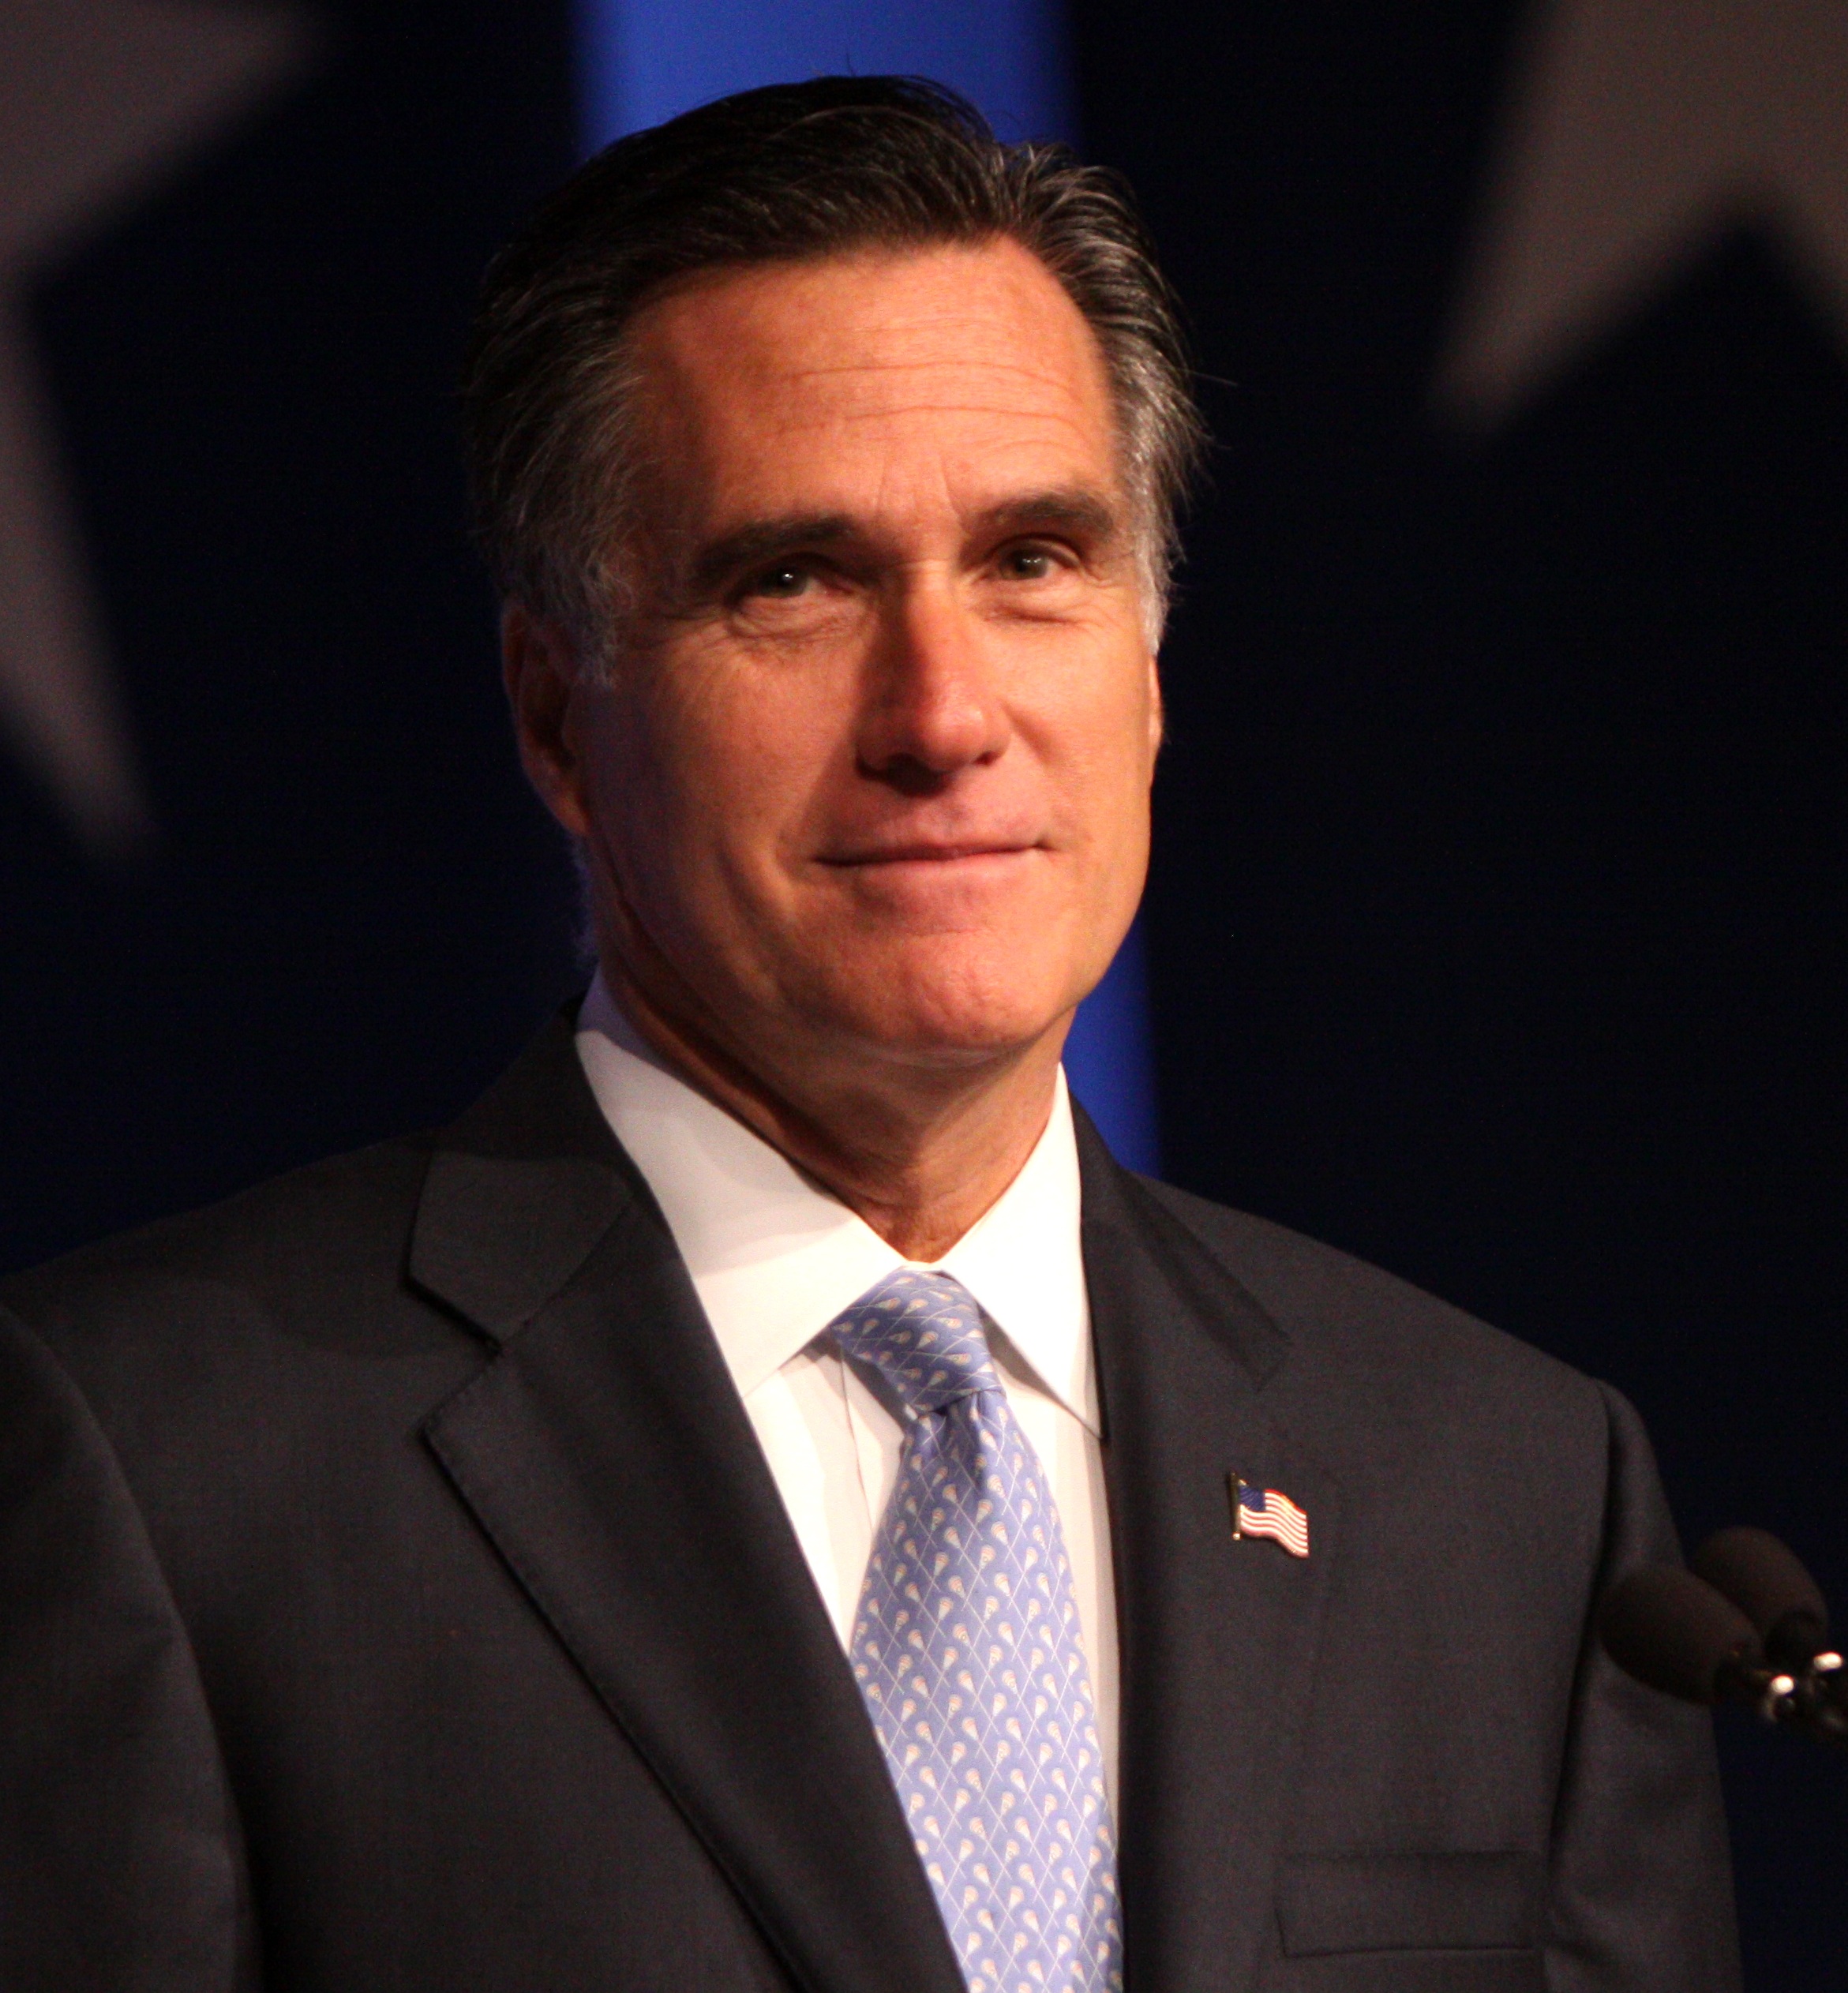 Governor Romney : Image from Wikimedia Commons